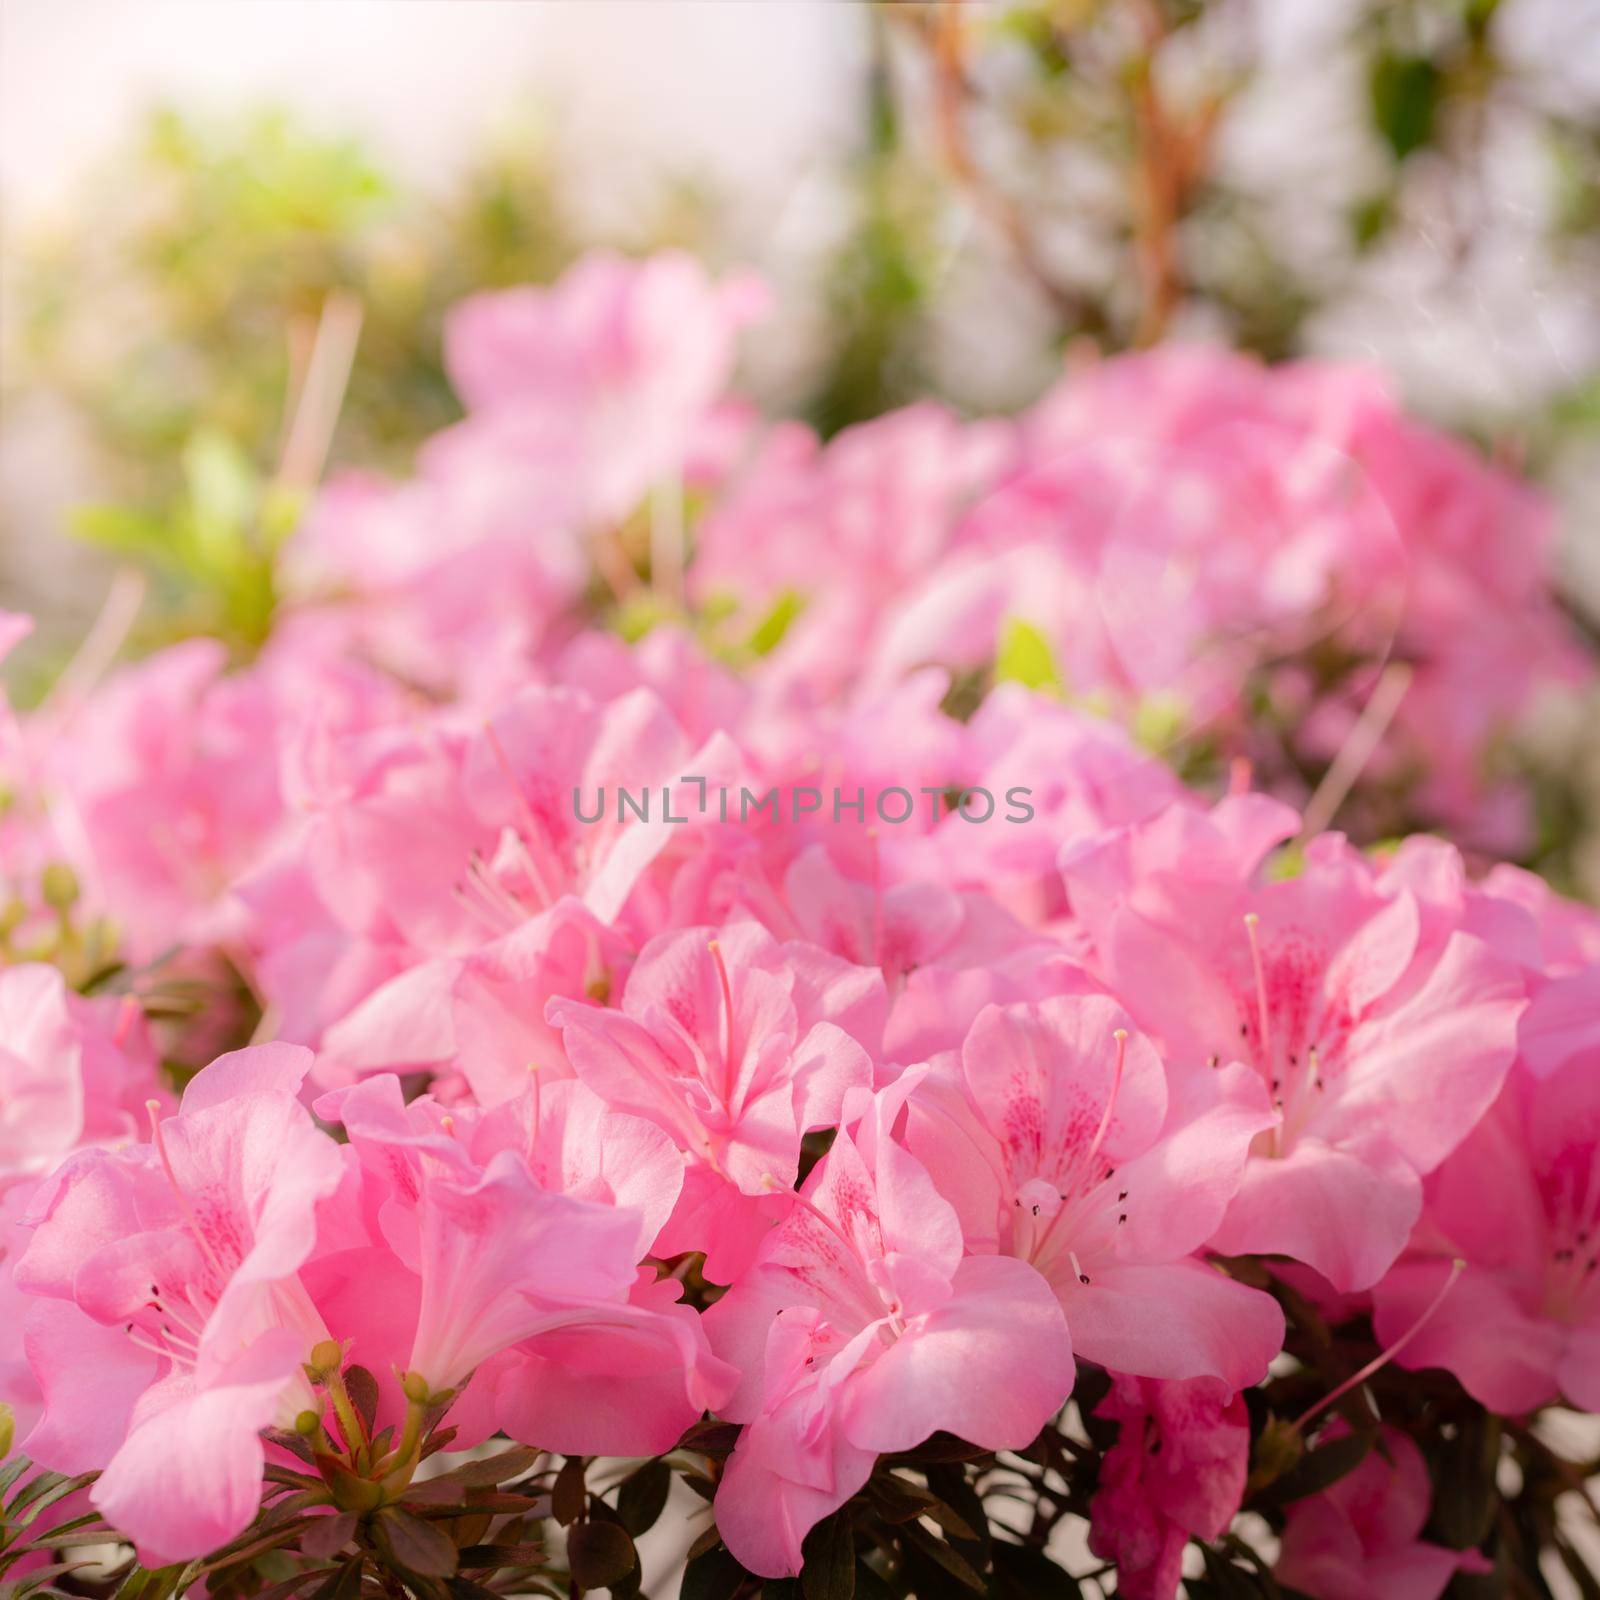 Flowers bloom azaleas, pink rhododendron buds on a green background by NataBene